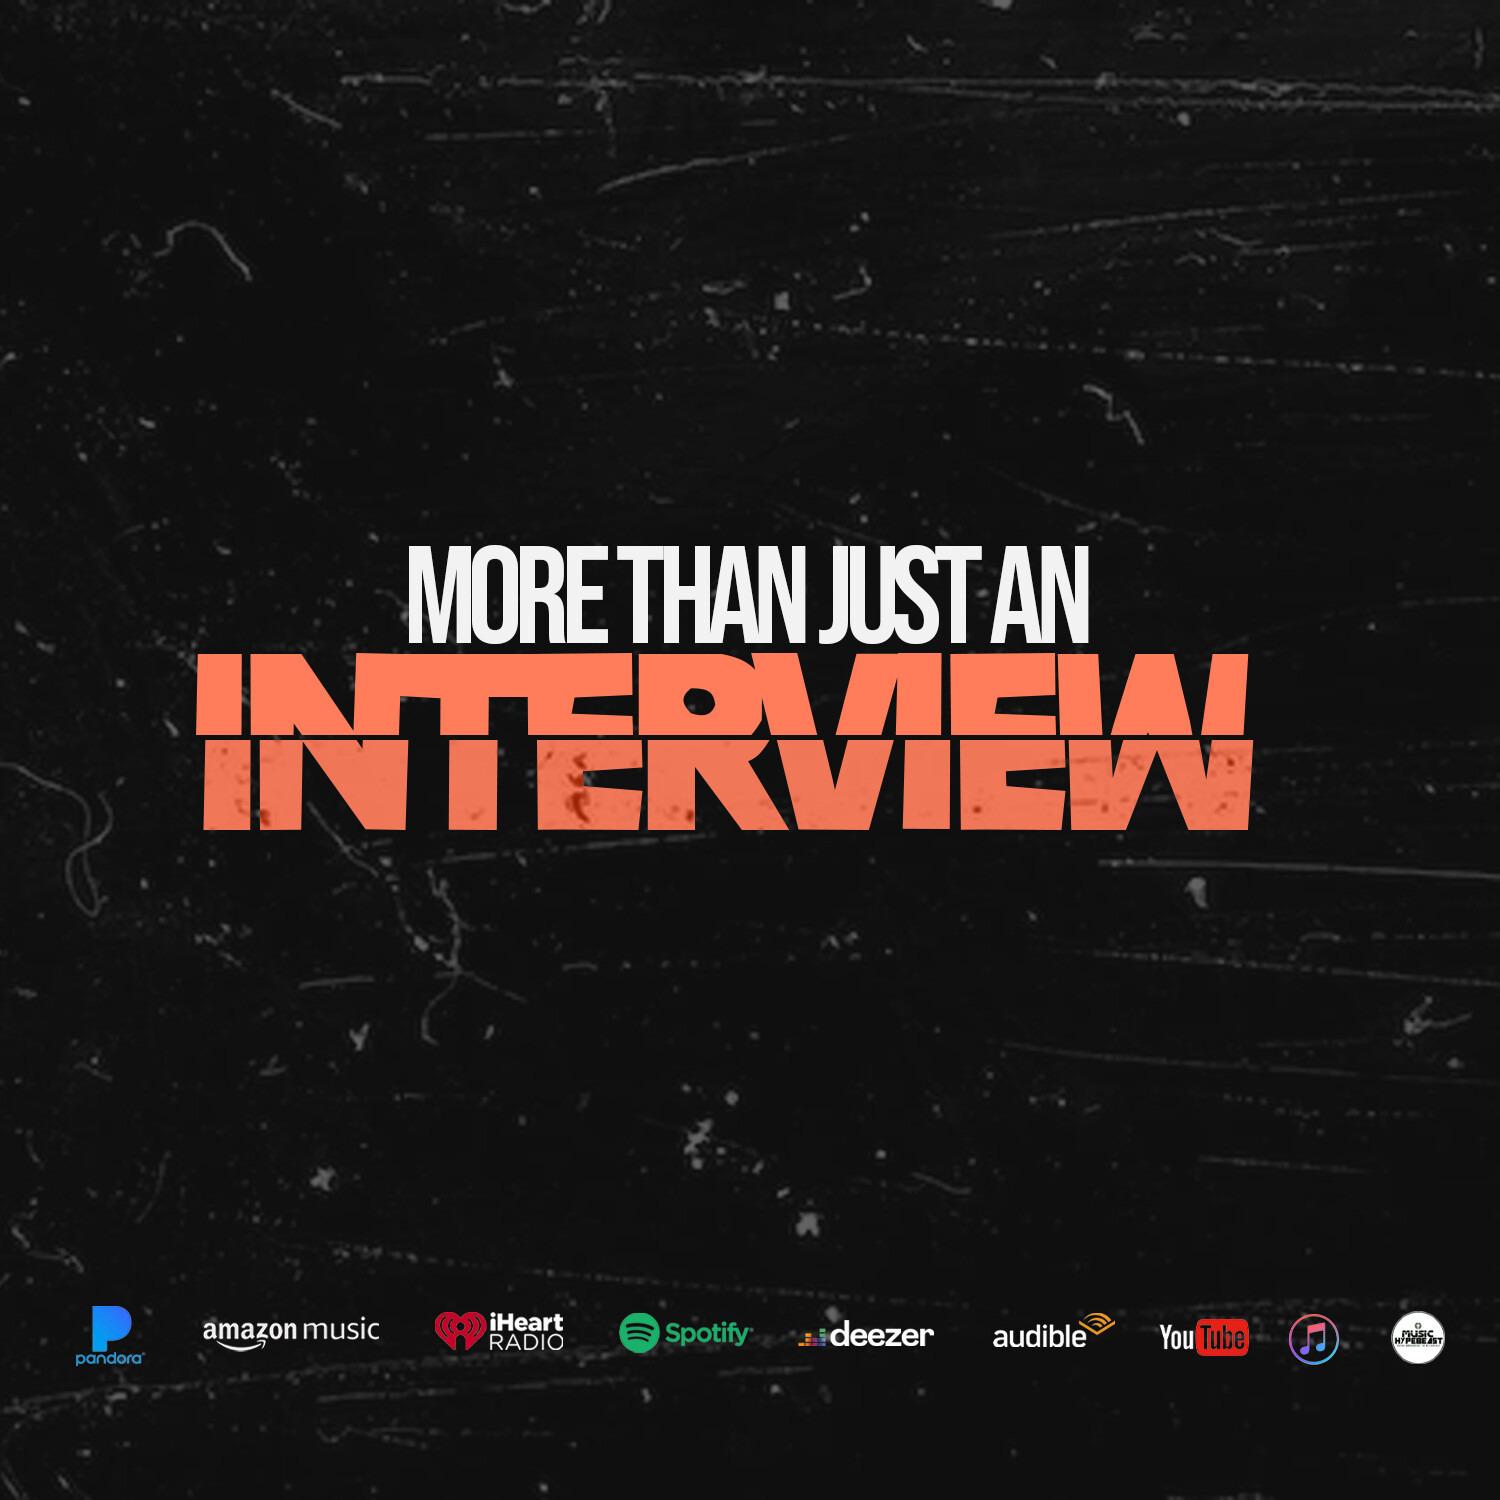 MORE THAN JUST AN INTERVIEW